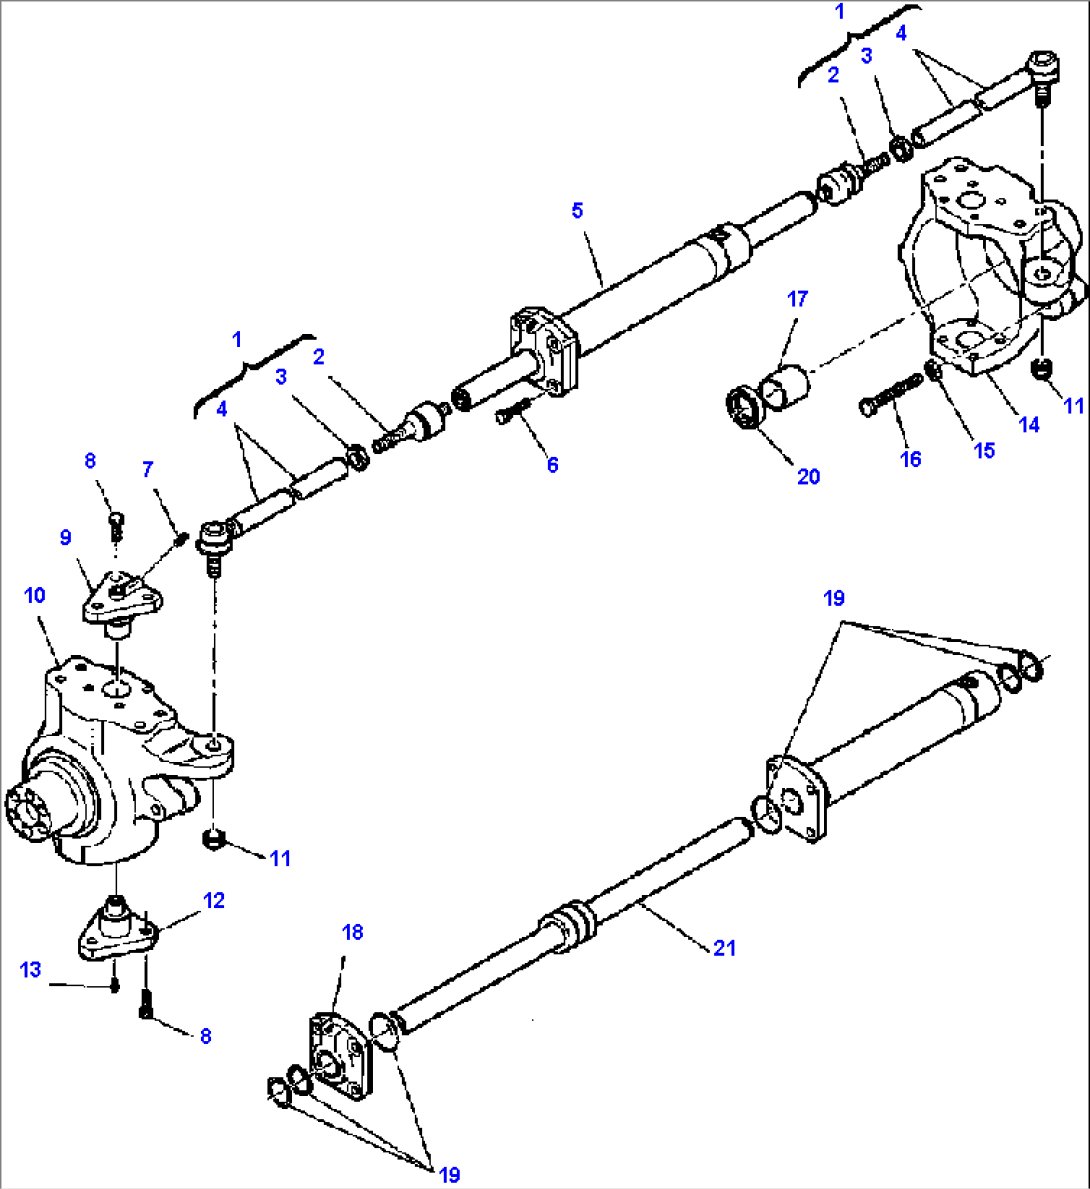 FIG. F3405-02A0 FRONT AXLE - STEERING ARM